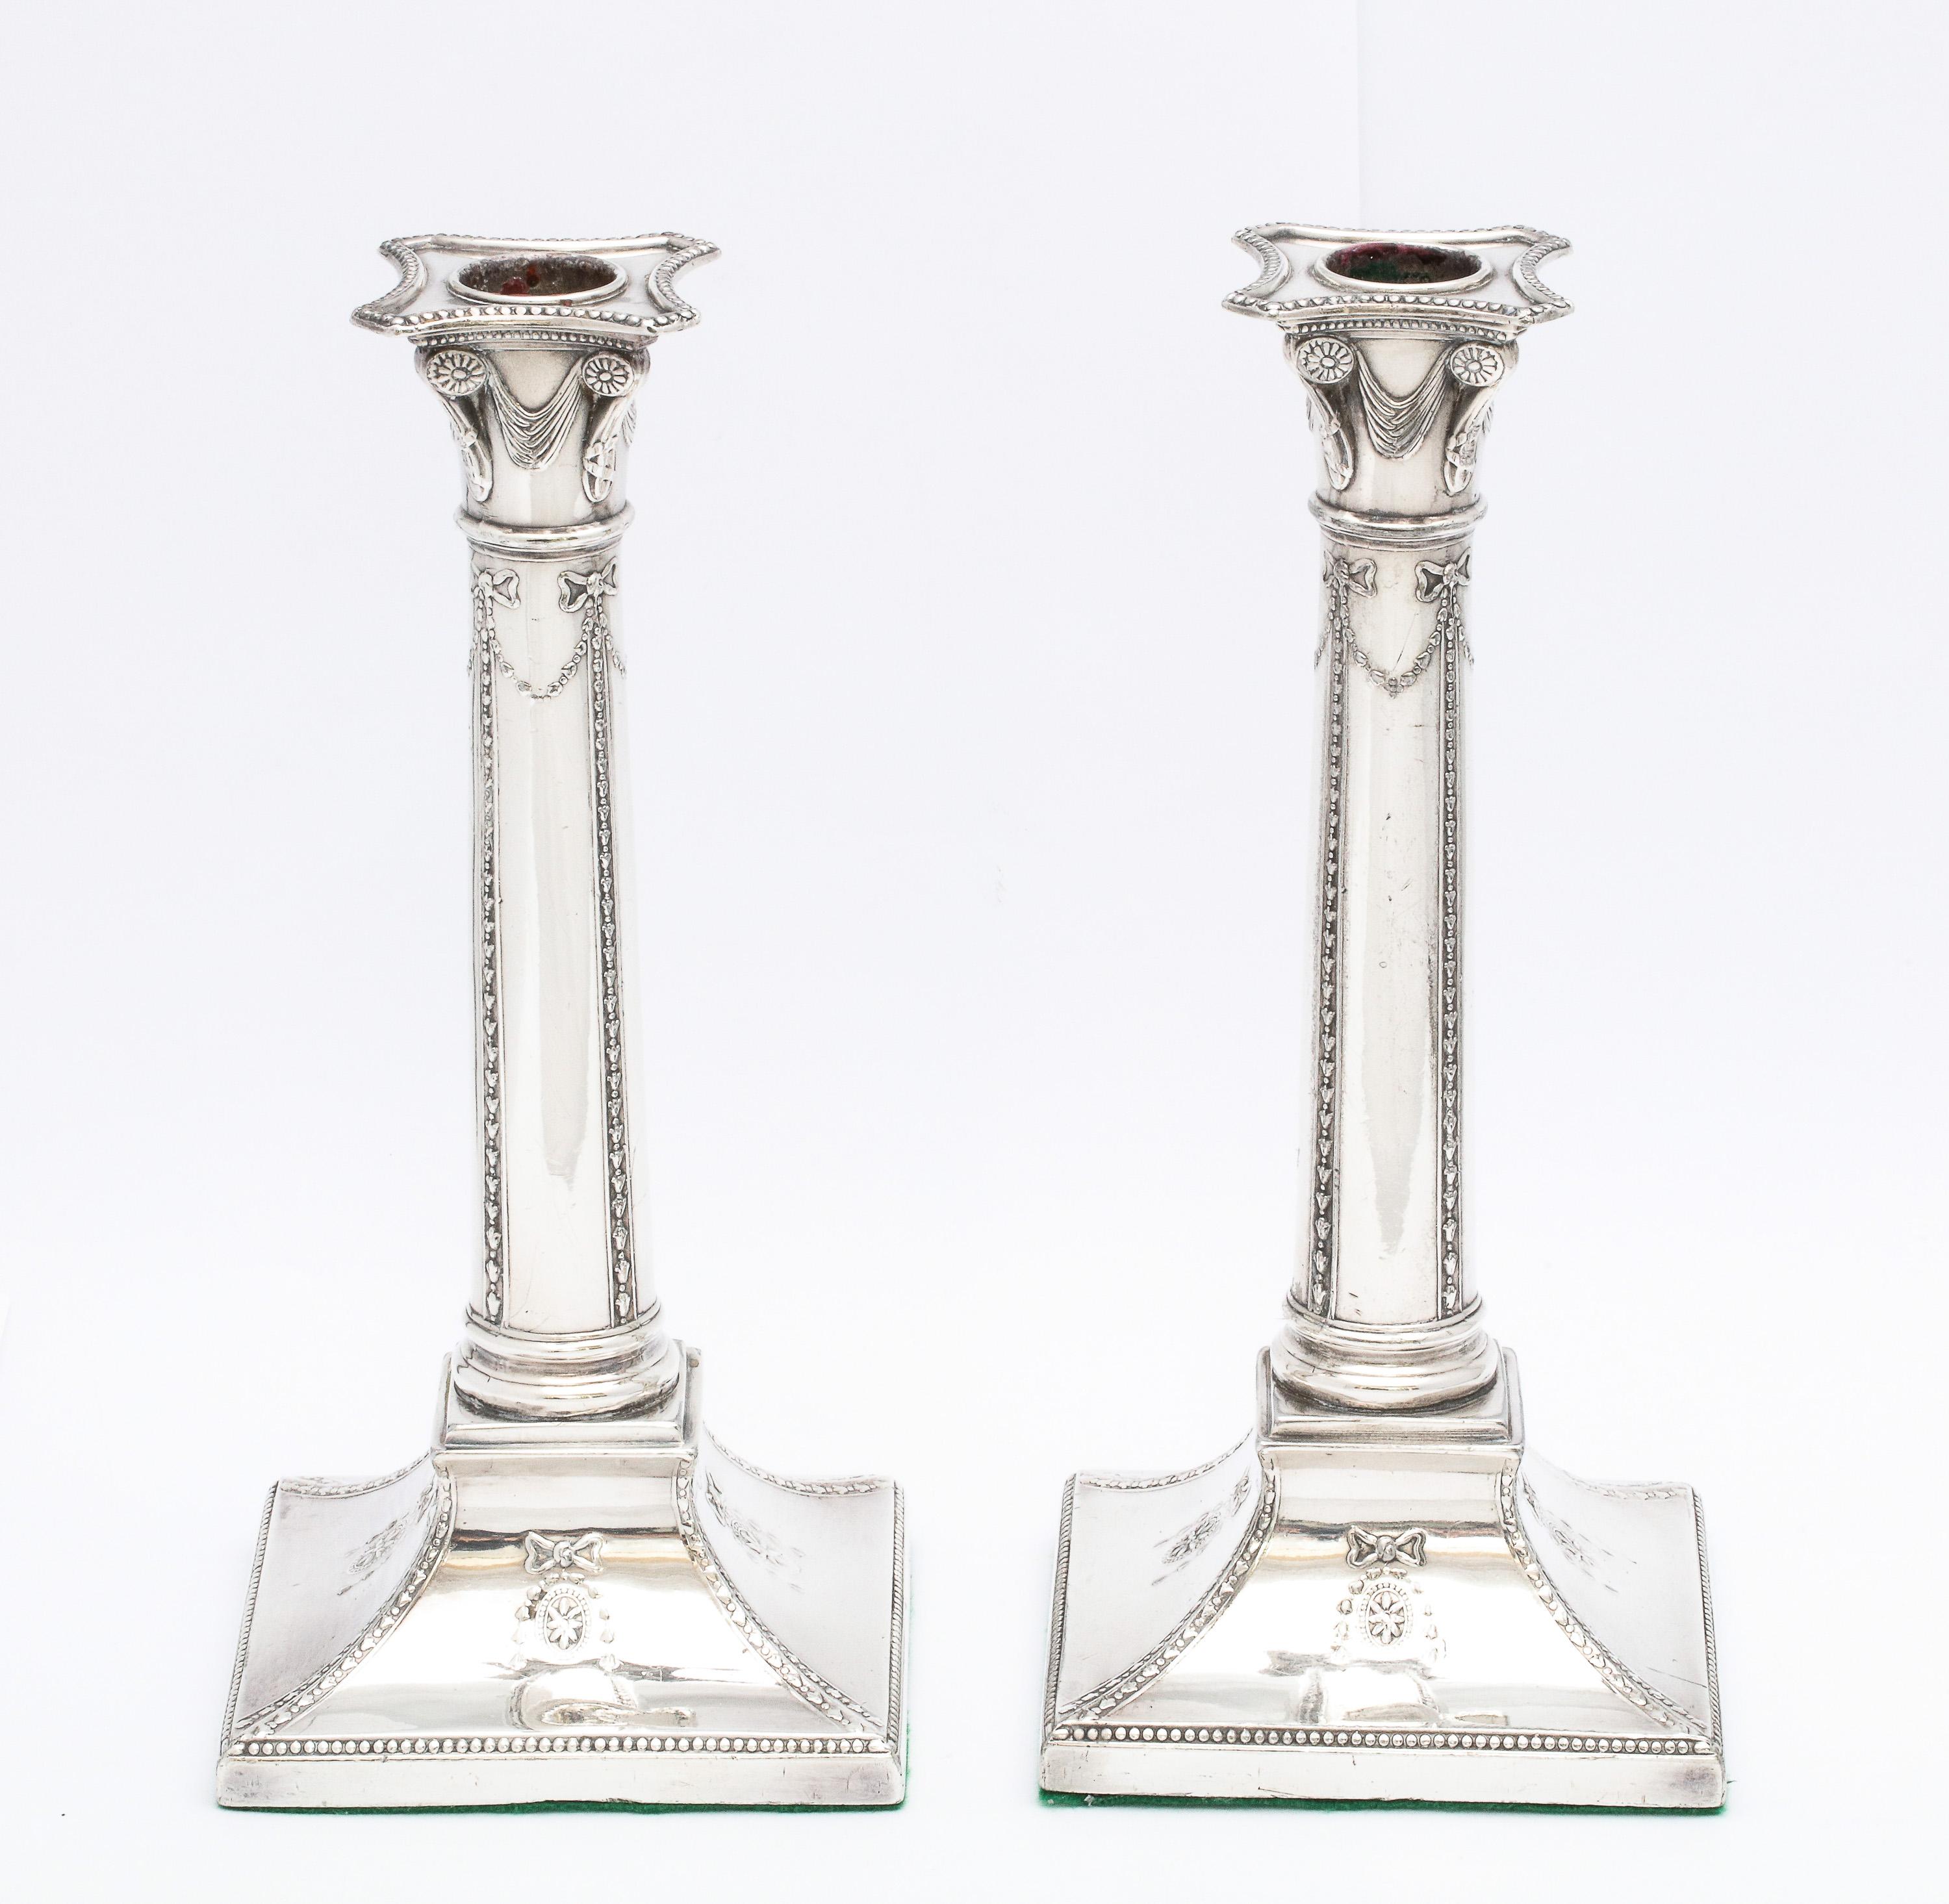 Pair of Adams-style, Sheffield plated, column-form candlesticks, England, circa 1900. Each candlestick measures over 9 1/4 inches high x 4 inches wide (across base) x 4 inches deep (across base). Weighted. Underside is covered in green felt. Plating